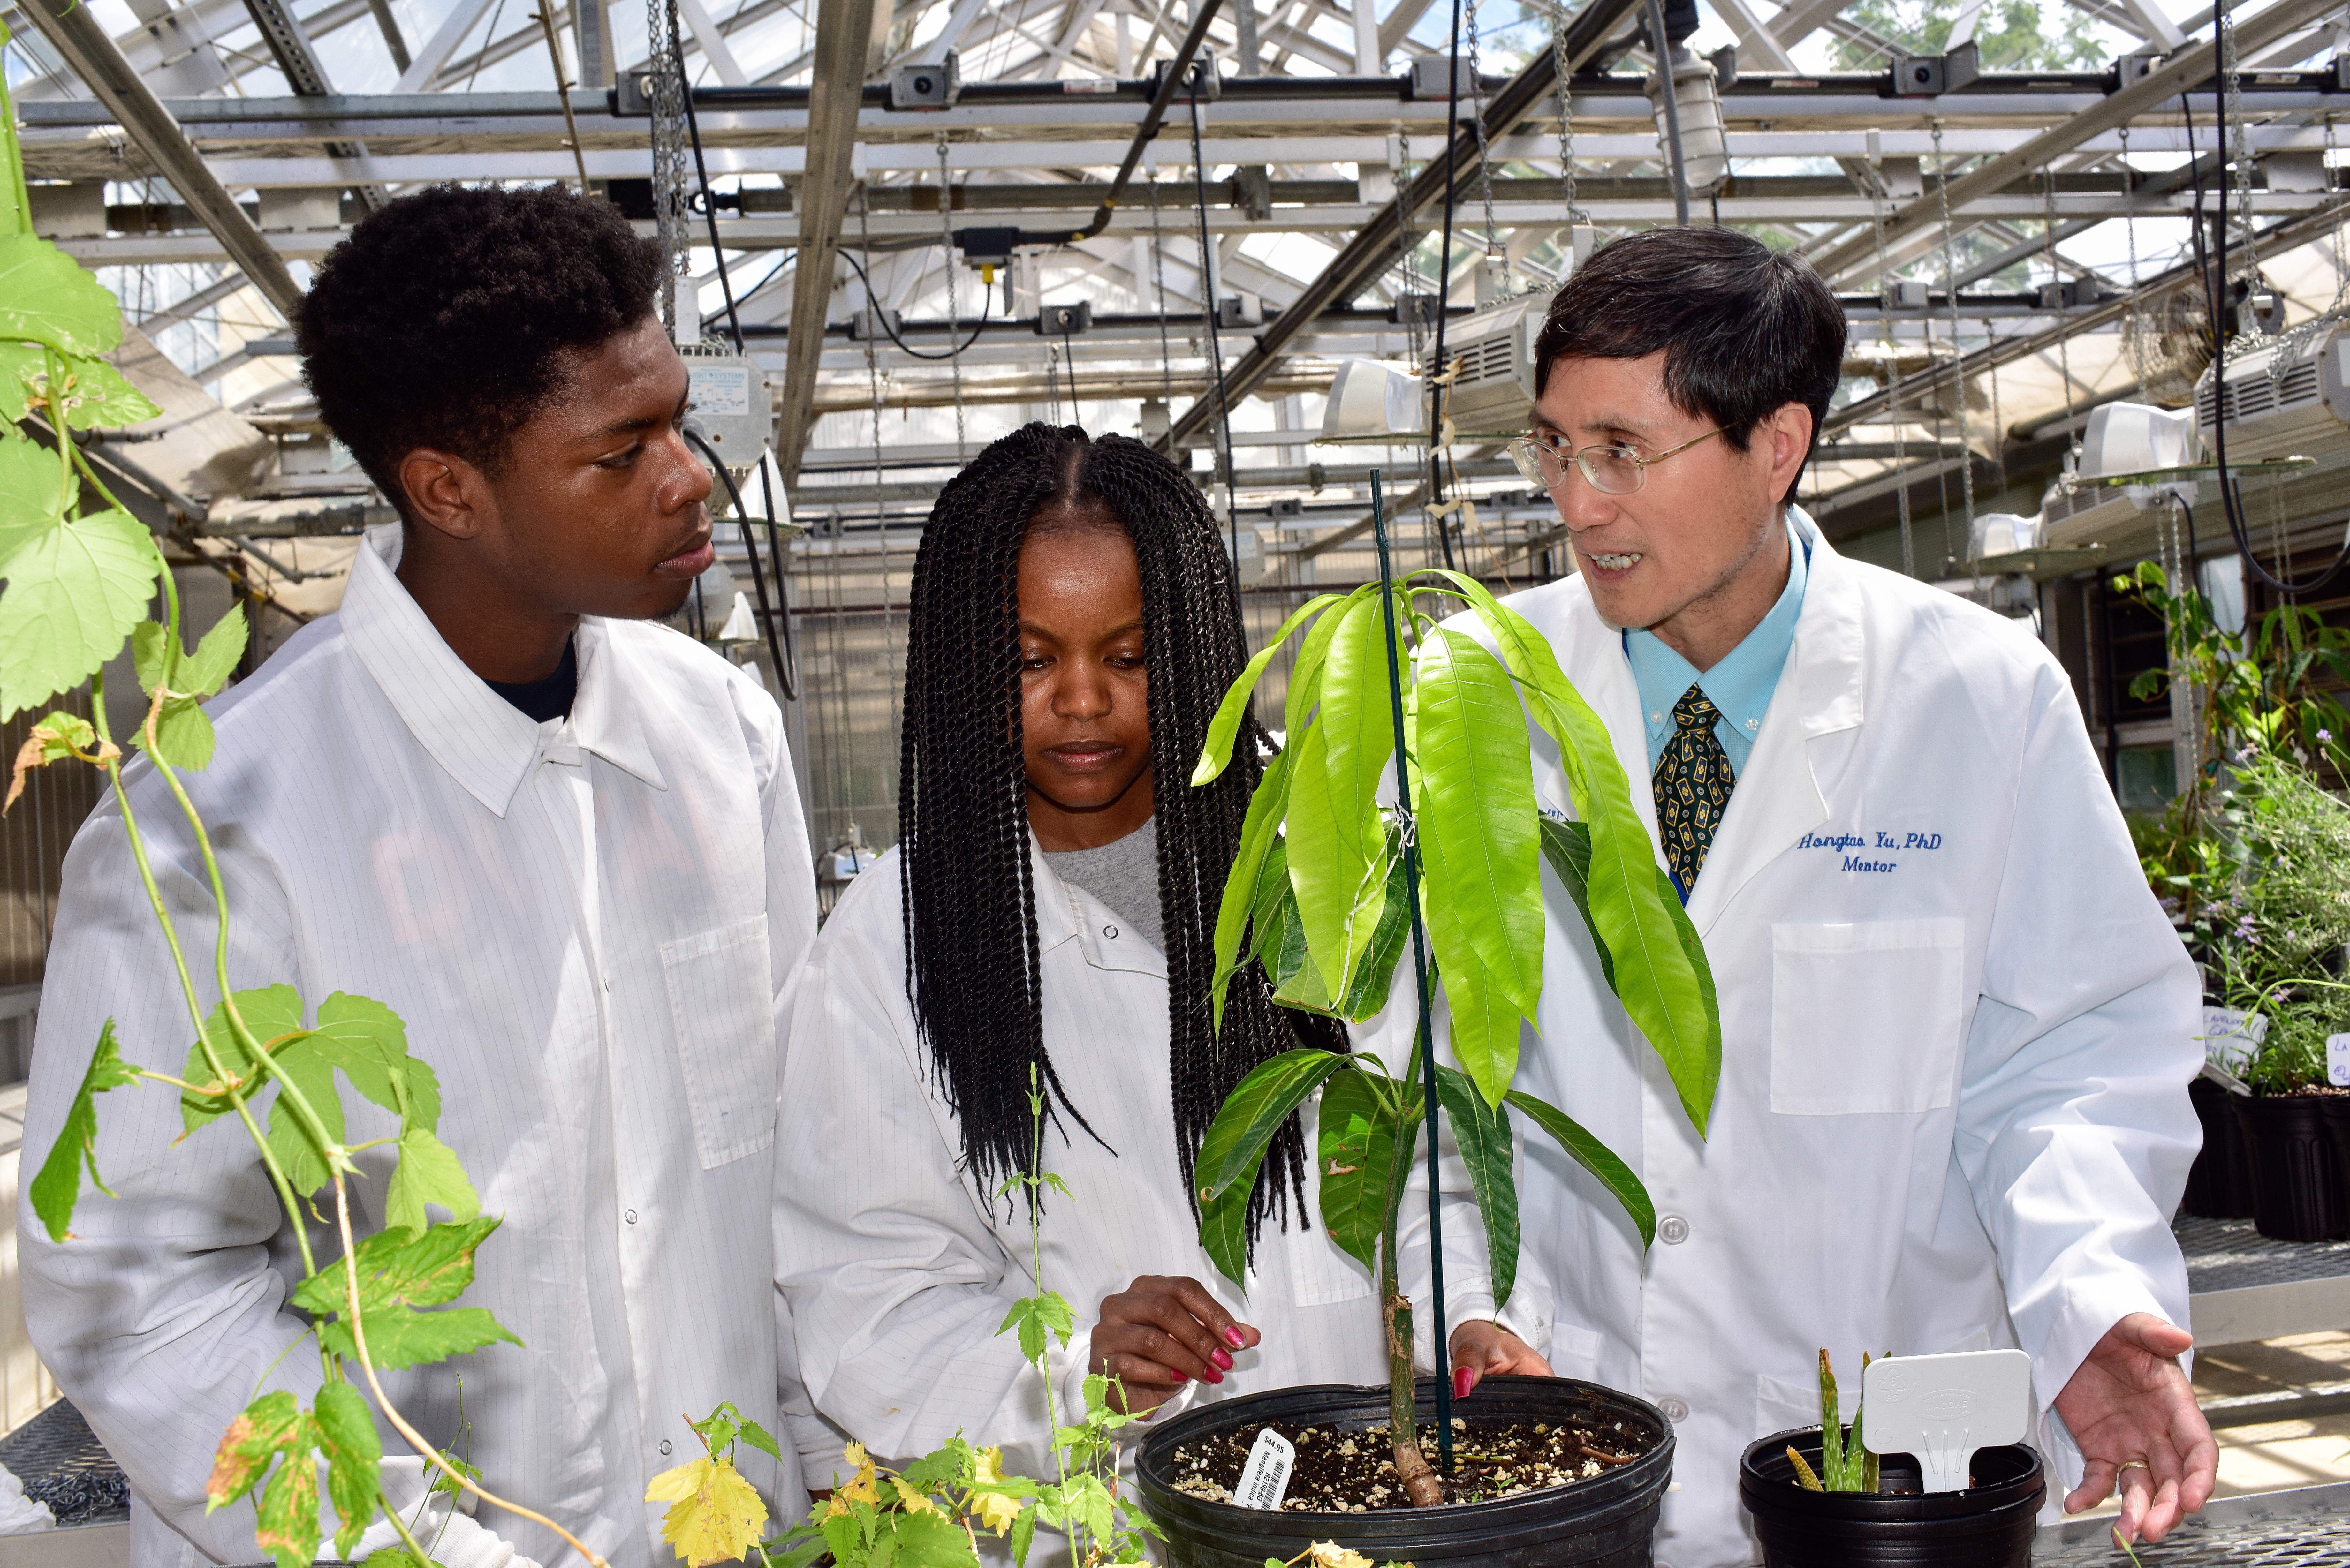 Morgan State University School of Computer, Mathematical and Natural Sciences Dean Hongtao Yu and students engage in horticultural research.